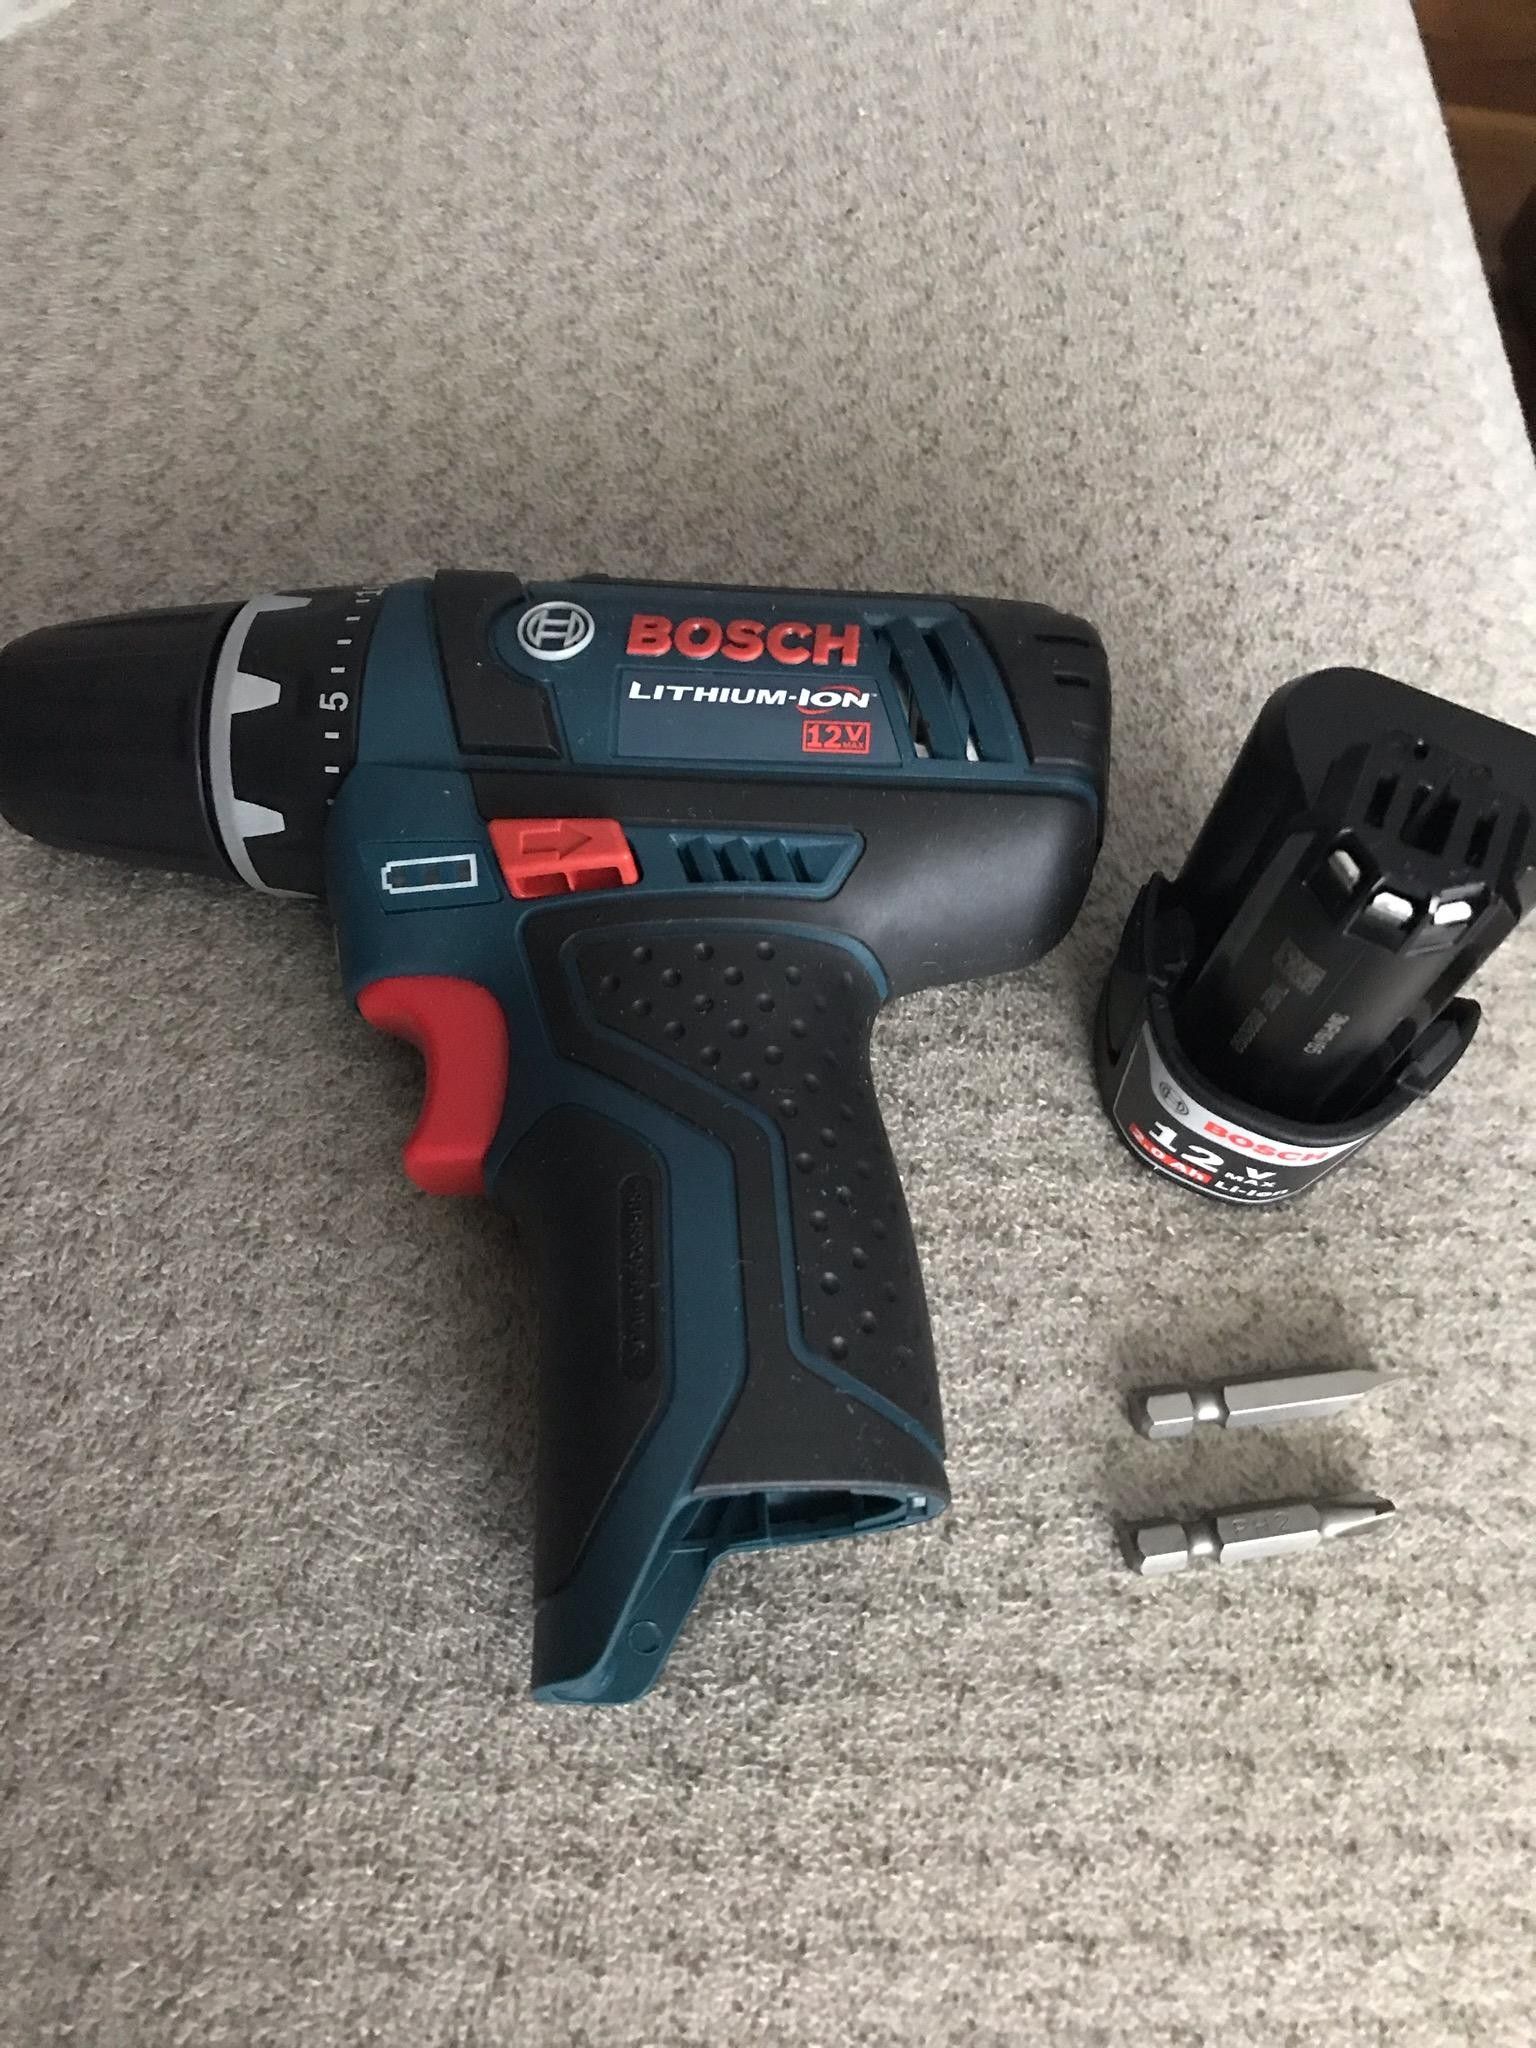 Bosch cordless 12 volt drill with battery & (2) bits /No Charger/